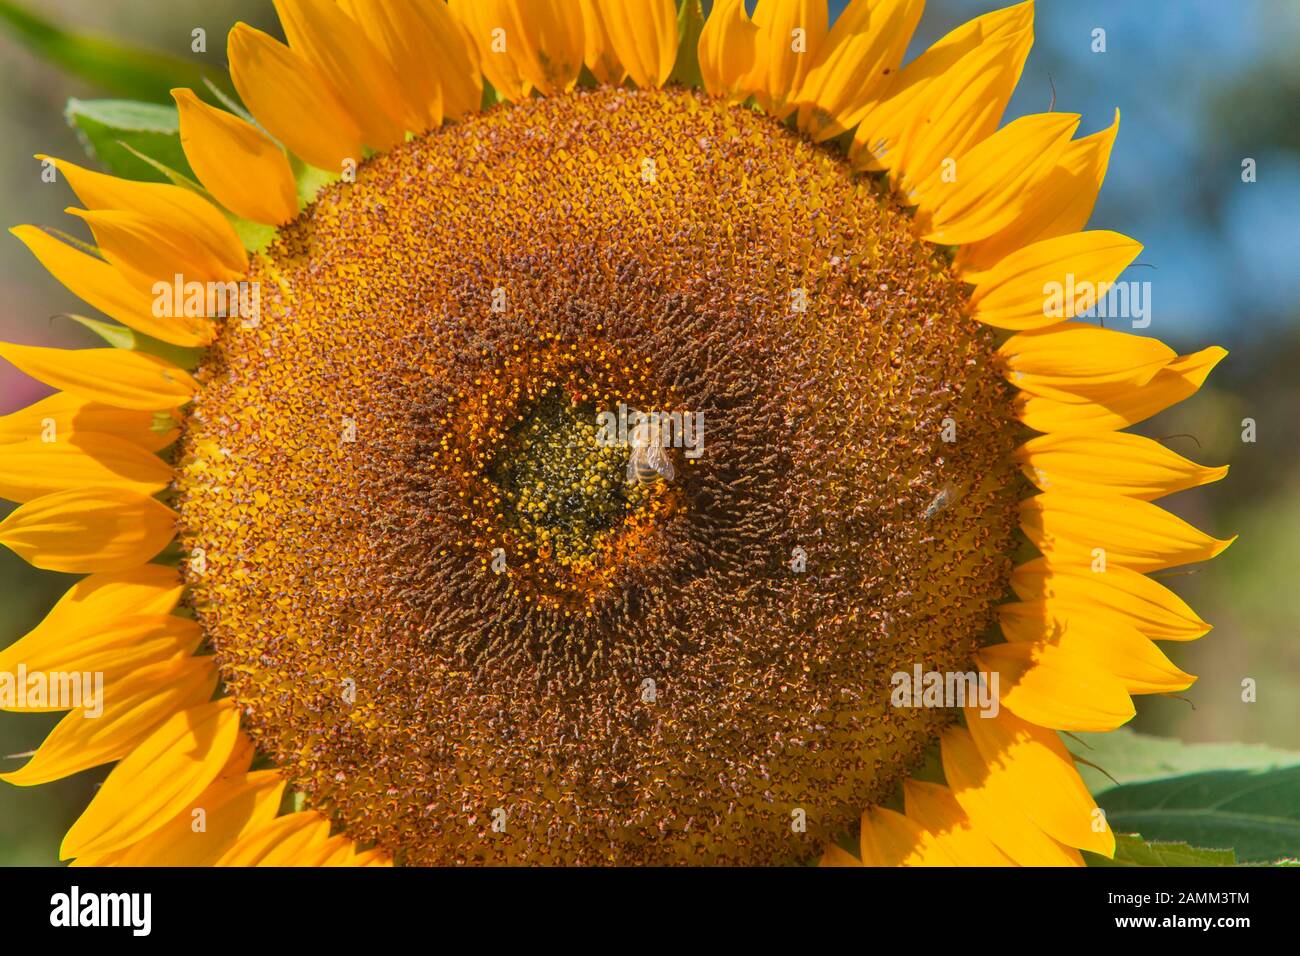 the sunflower is pollinated by a bee, plant and animal life [automated translation] Stock Photo